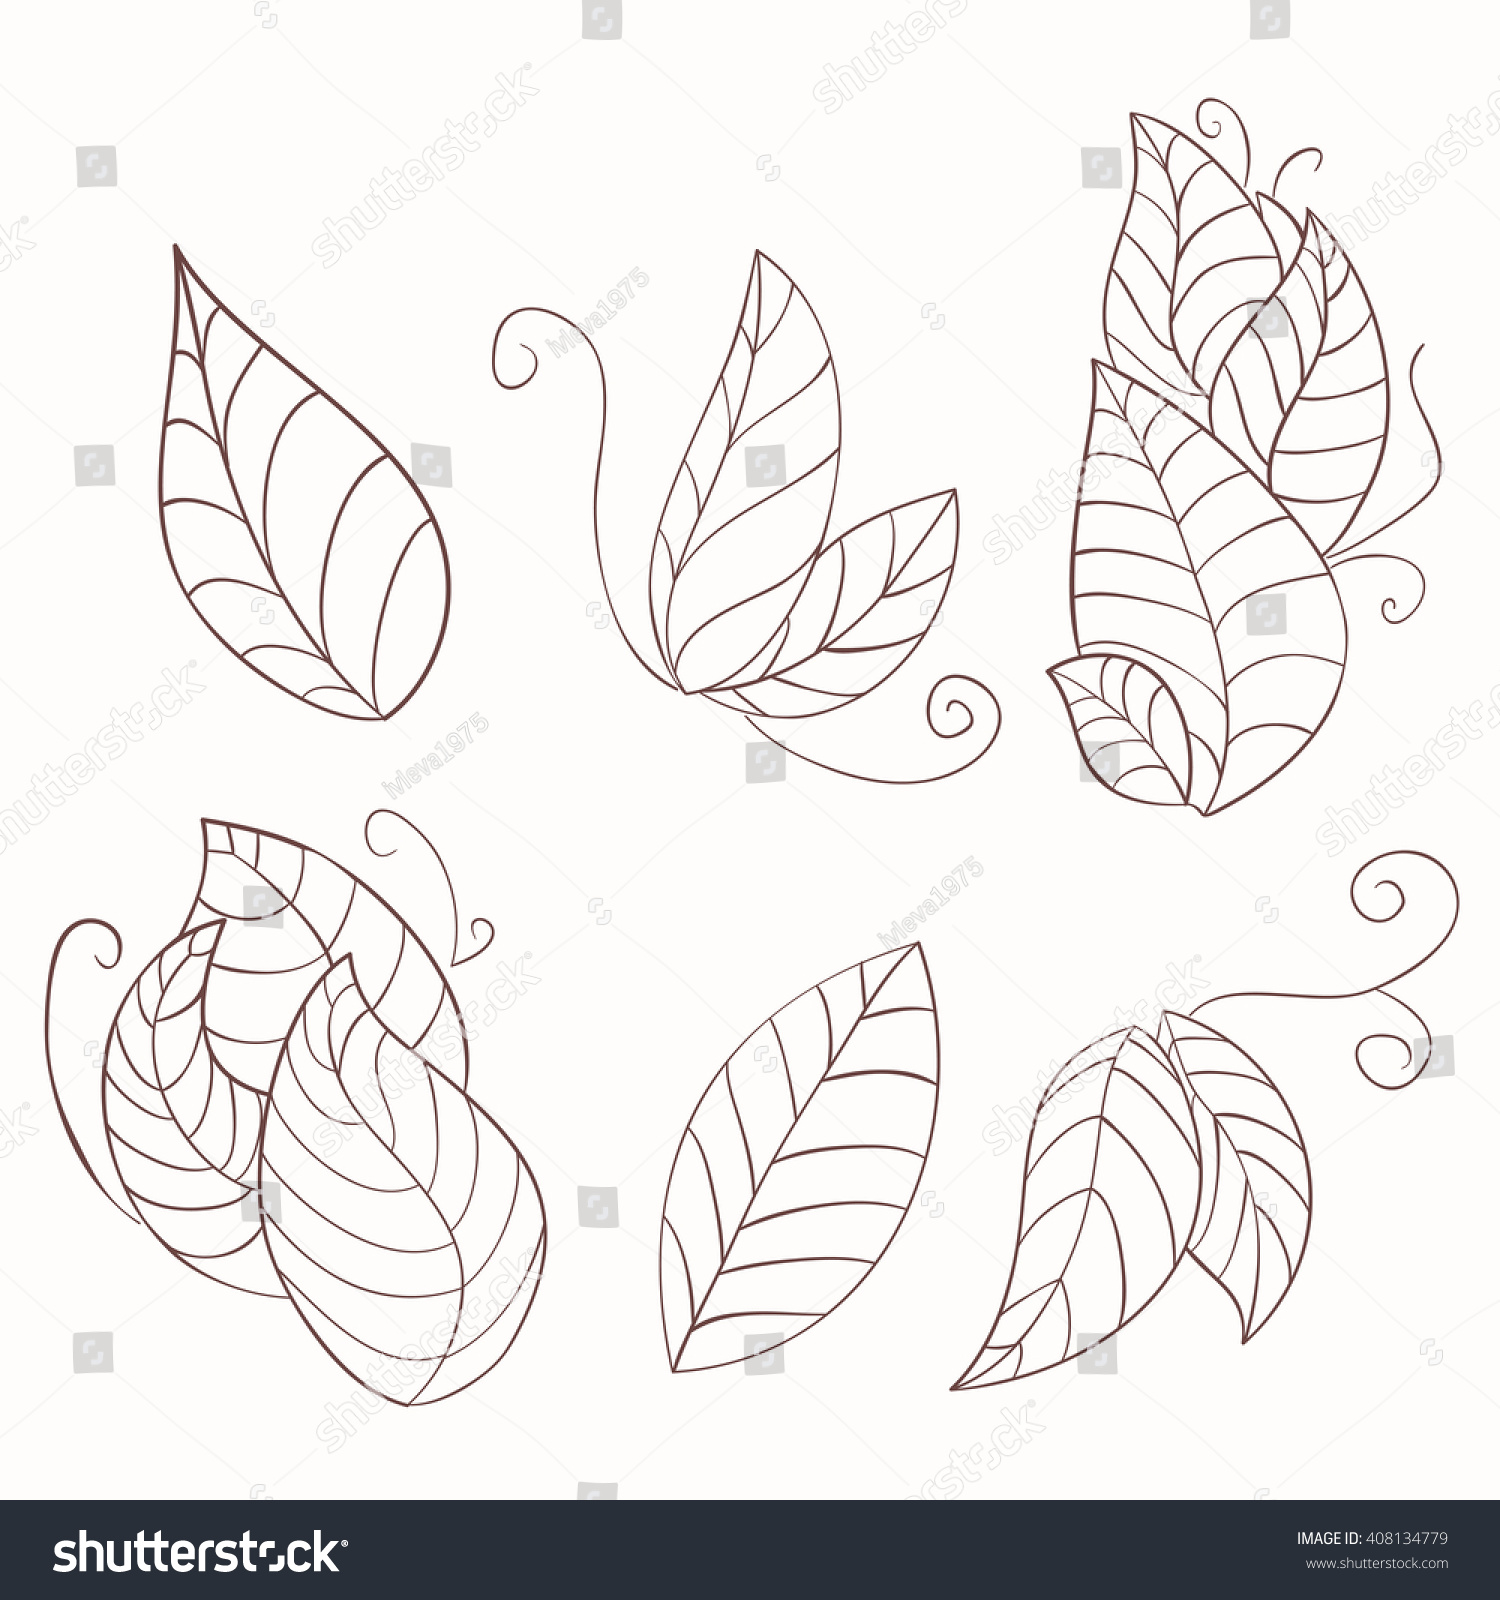 Set Decorative Leaves Drawn By Hand Stock Vector 408134779 - Shutterstock